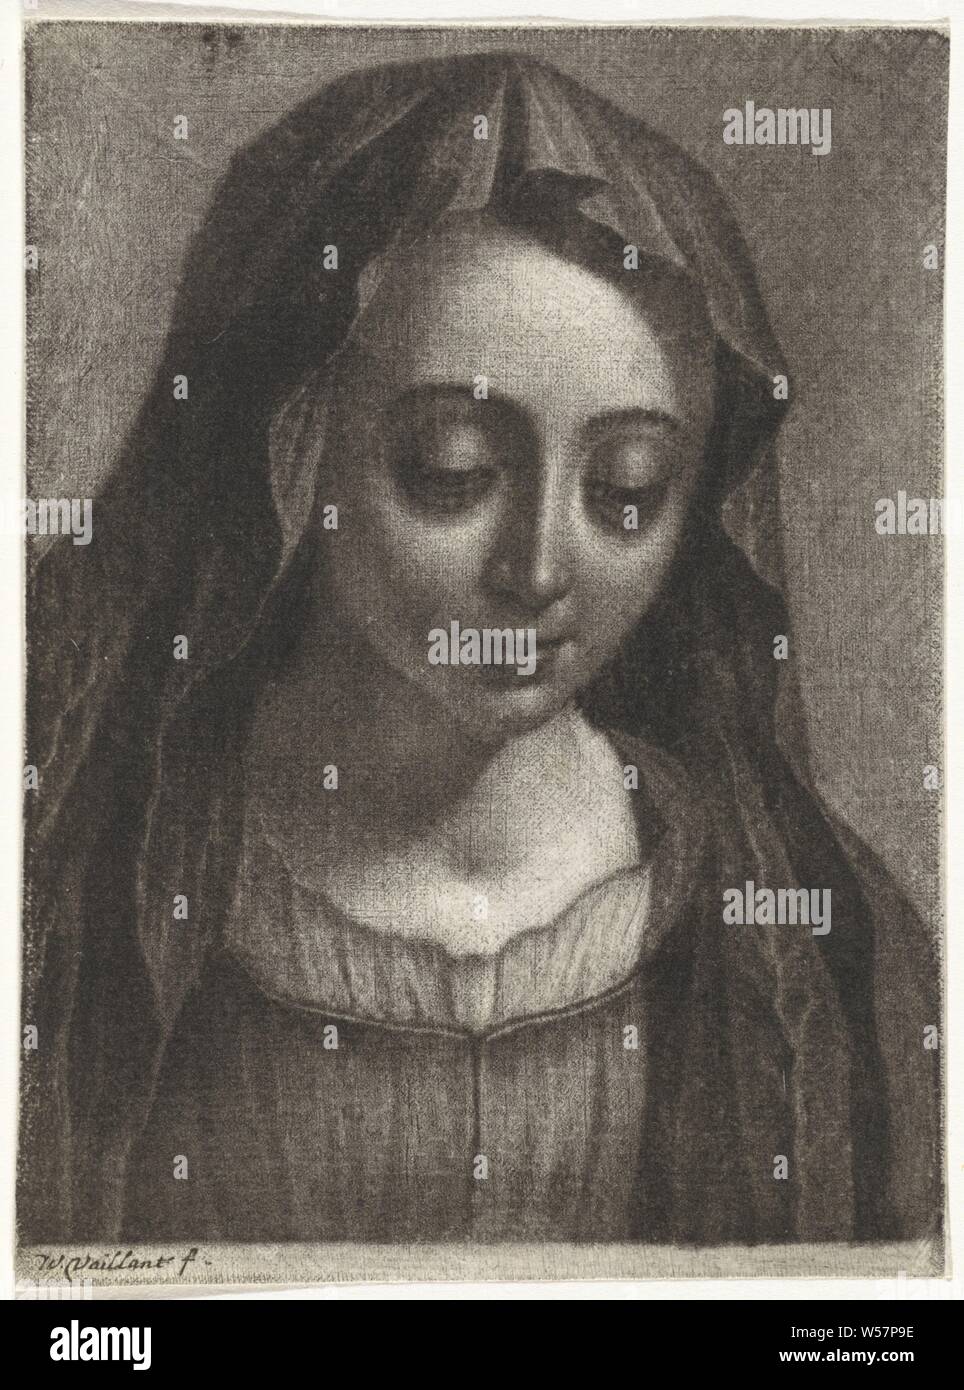 Head of Saint Mary, veil, Wallerant Vaillant (mentioned on object), 1658 - 1677, paper, h 117 mm × w 85 mm Stock Photo